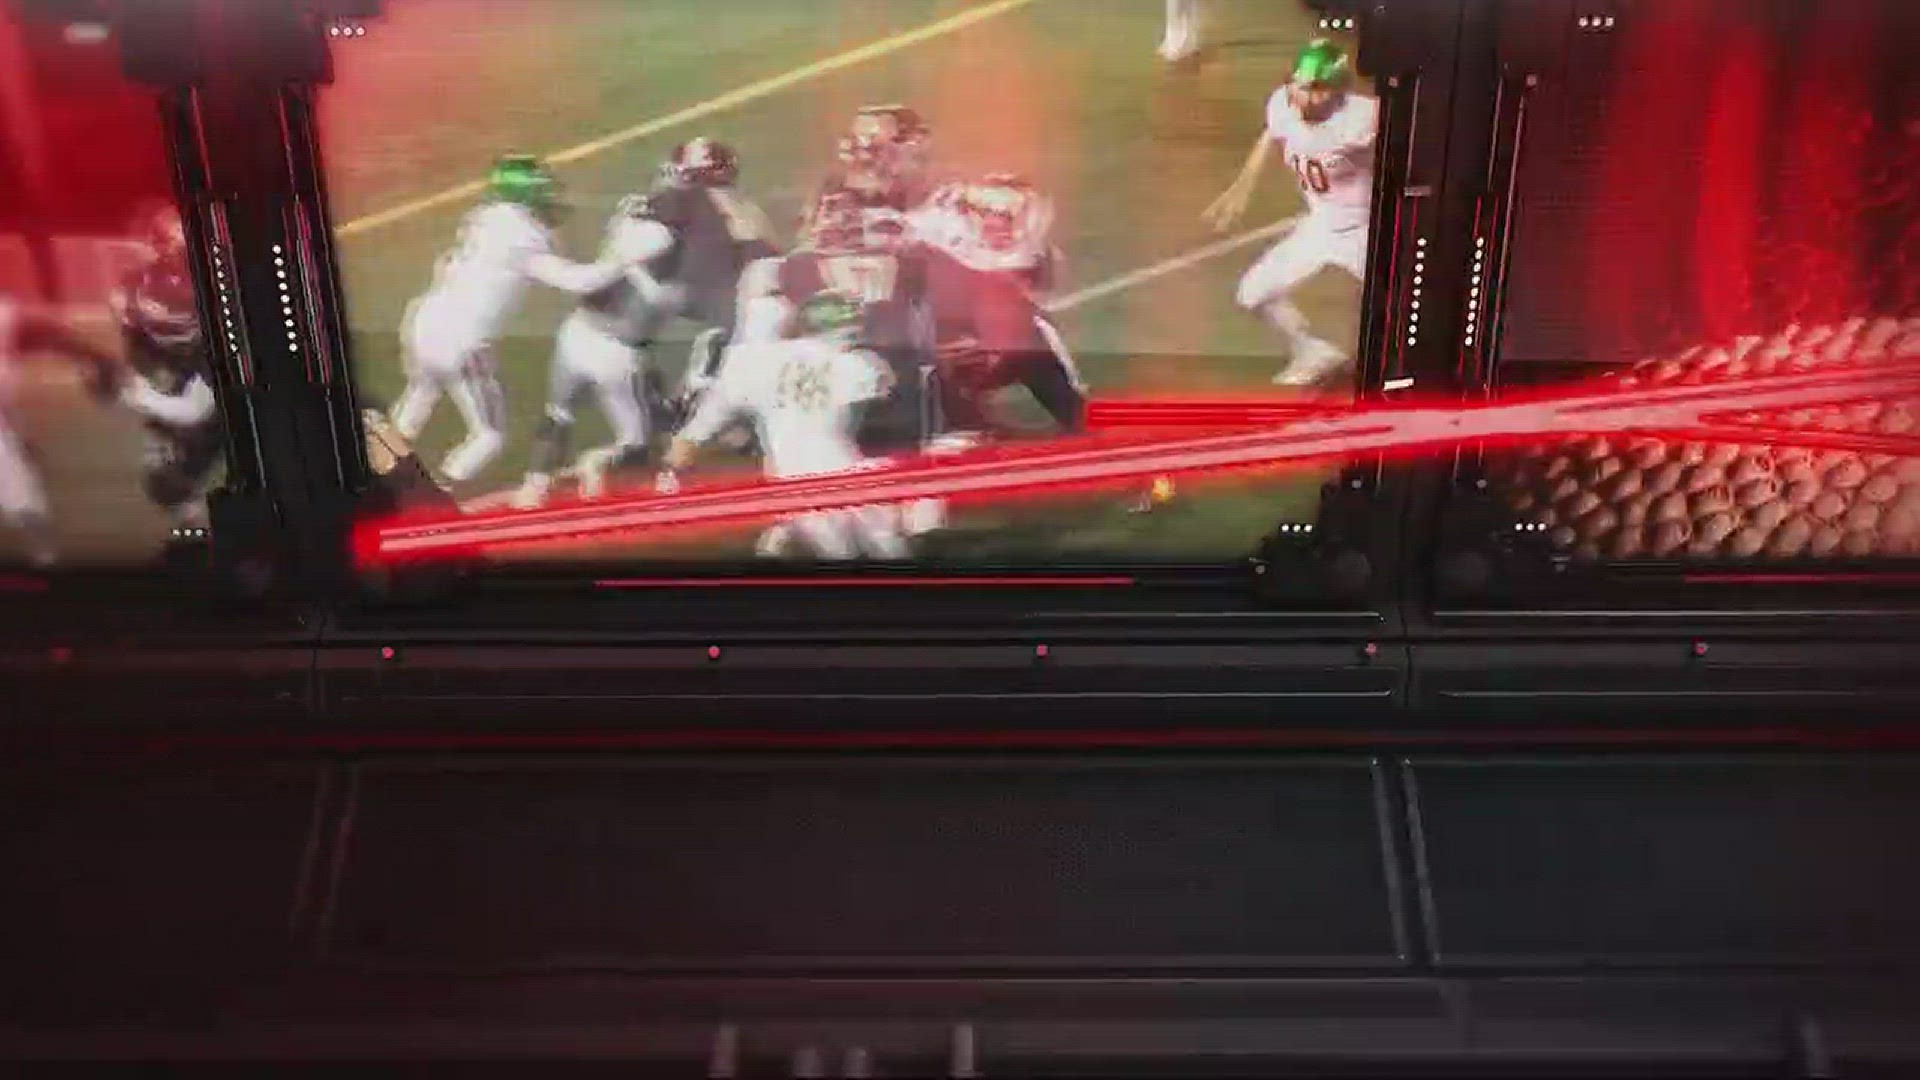 Highlights from the first round of the Oregon high school football season 2017 playoffs. Episode aired on Nov. 3, 2017.